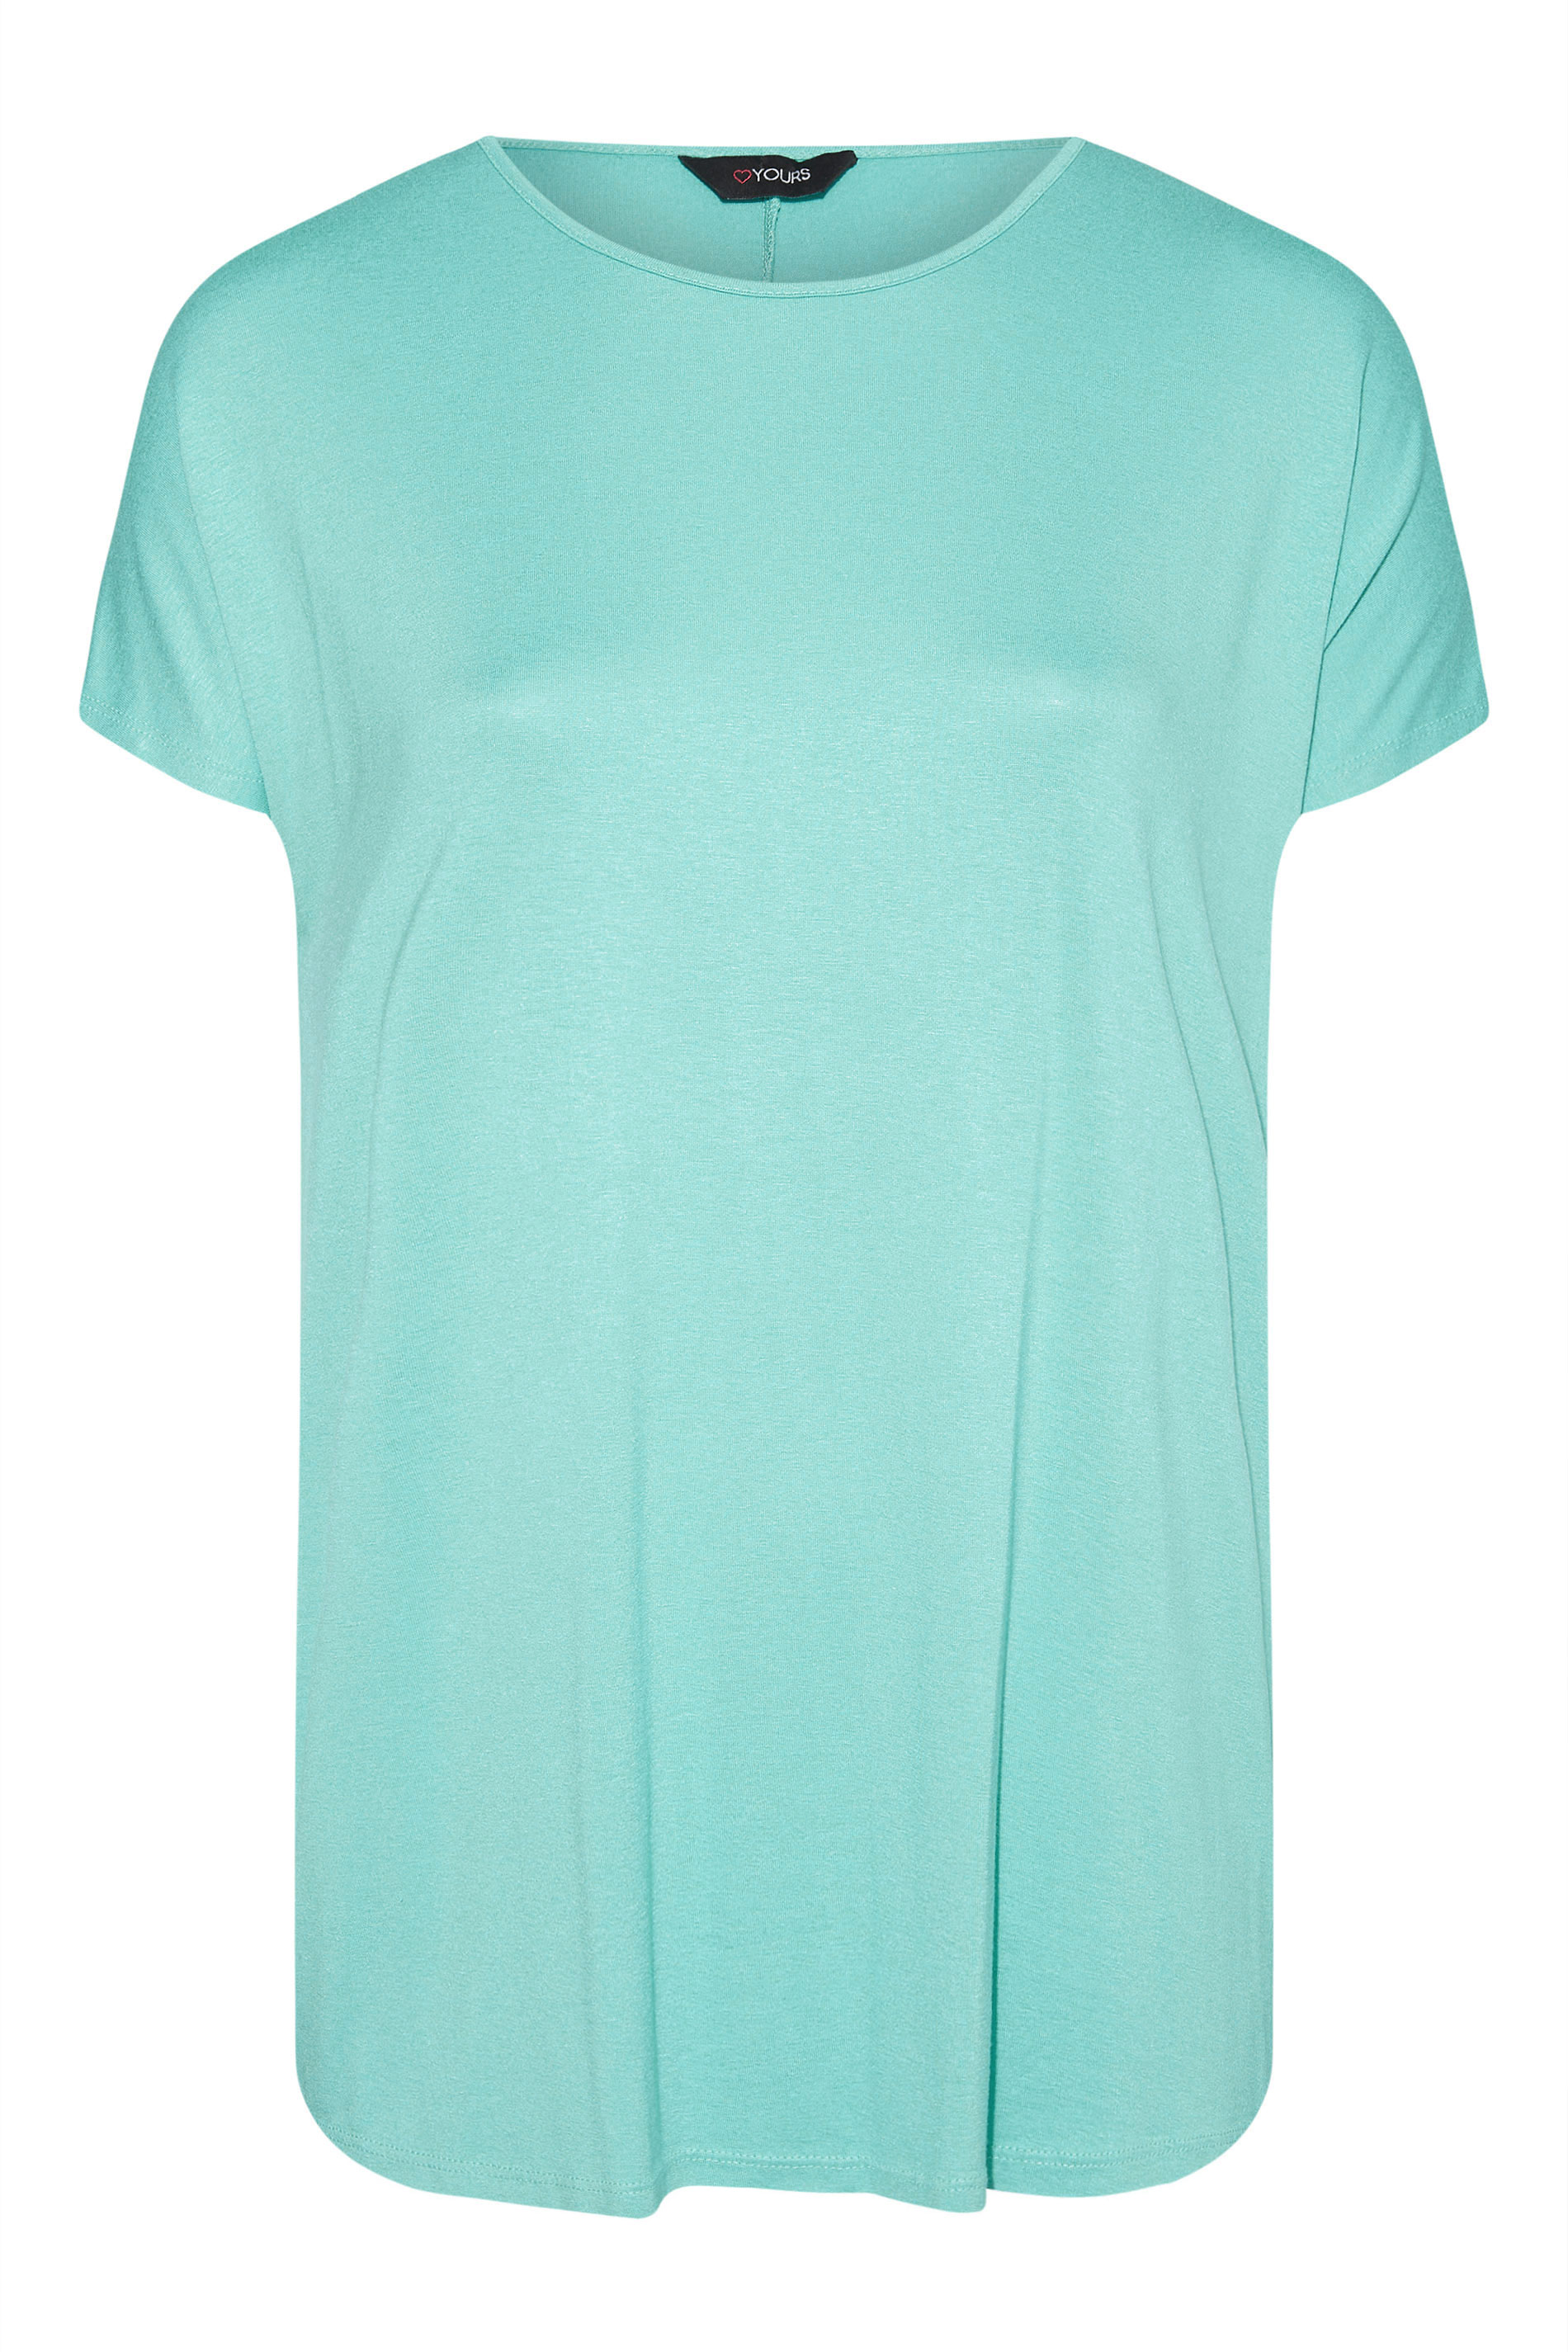 Grande taille  Tops Grande taille  T-Shirts | T-Shirt Bleu Turquoise Manches Courtes en Jersey - AT85166